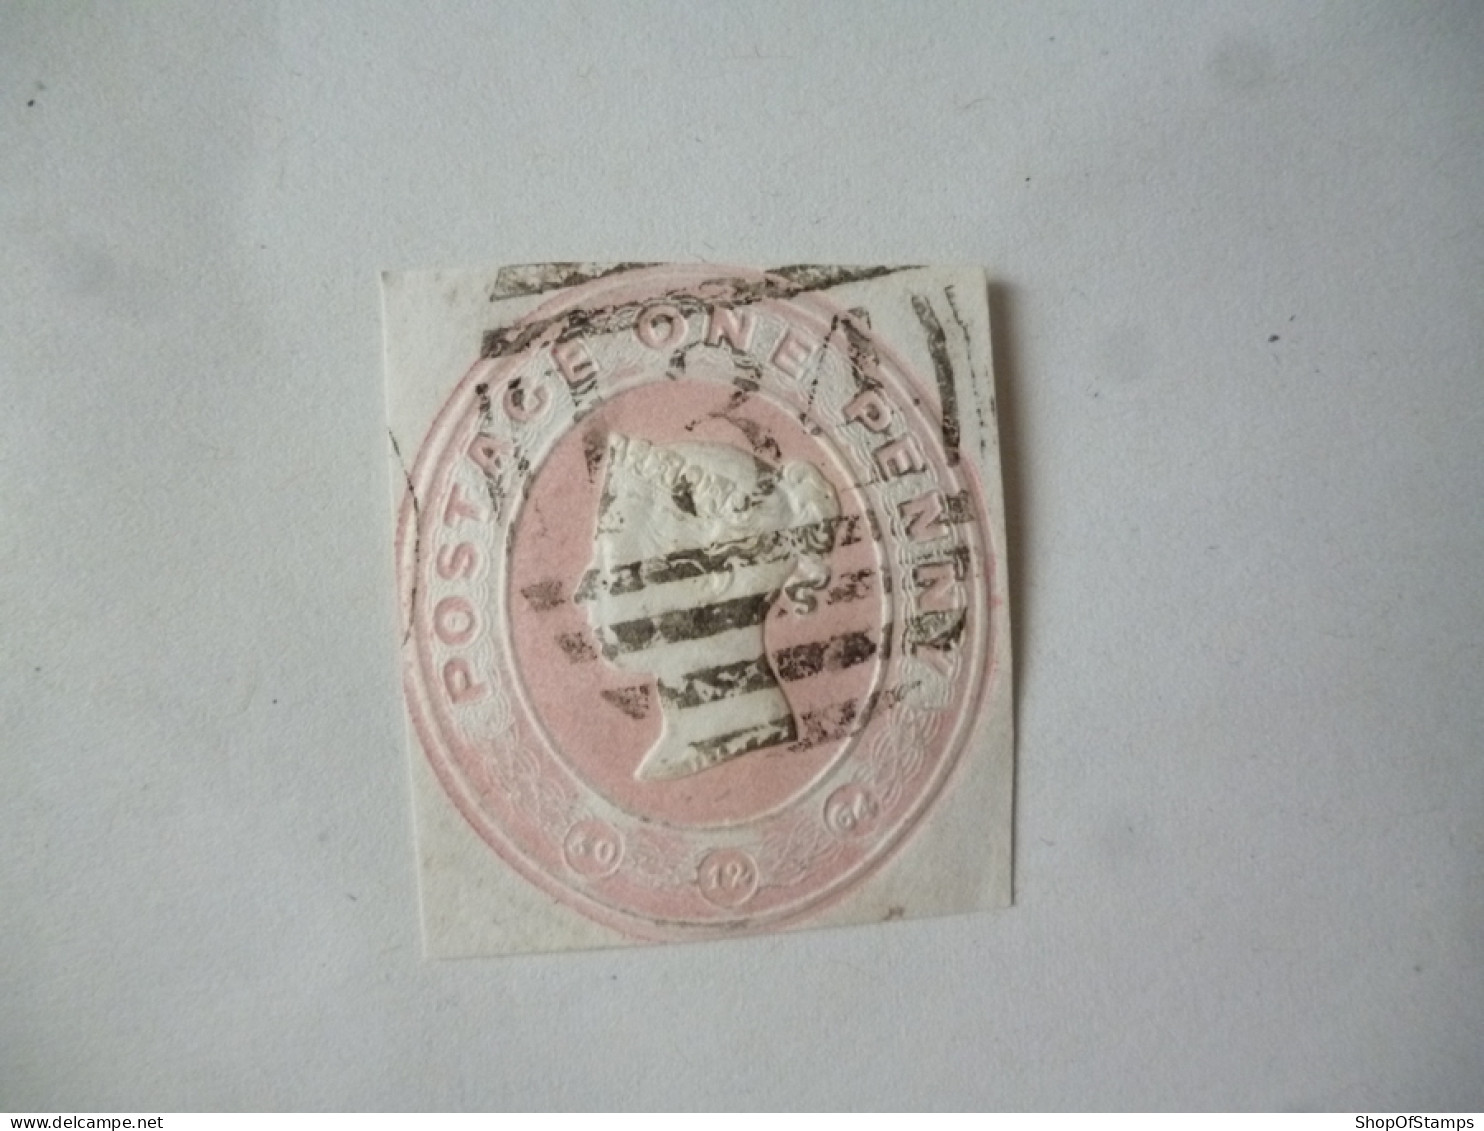 GREAT BRITAIN-POSTAL HISTORY QV EMBOSS CUT OUT WITH NUMBERED CANCELLATION - Marcophilie